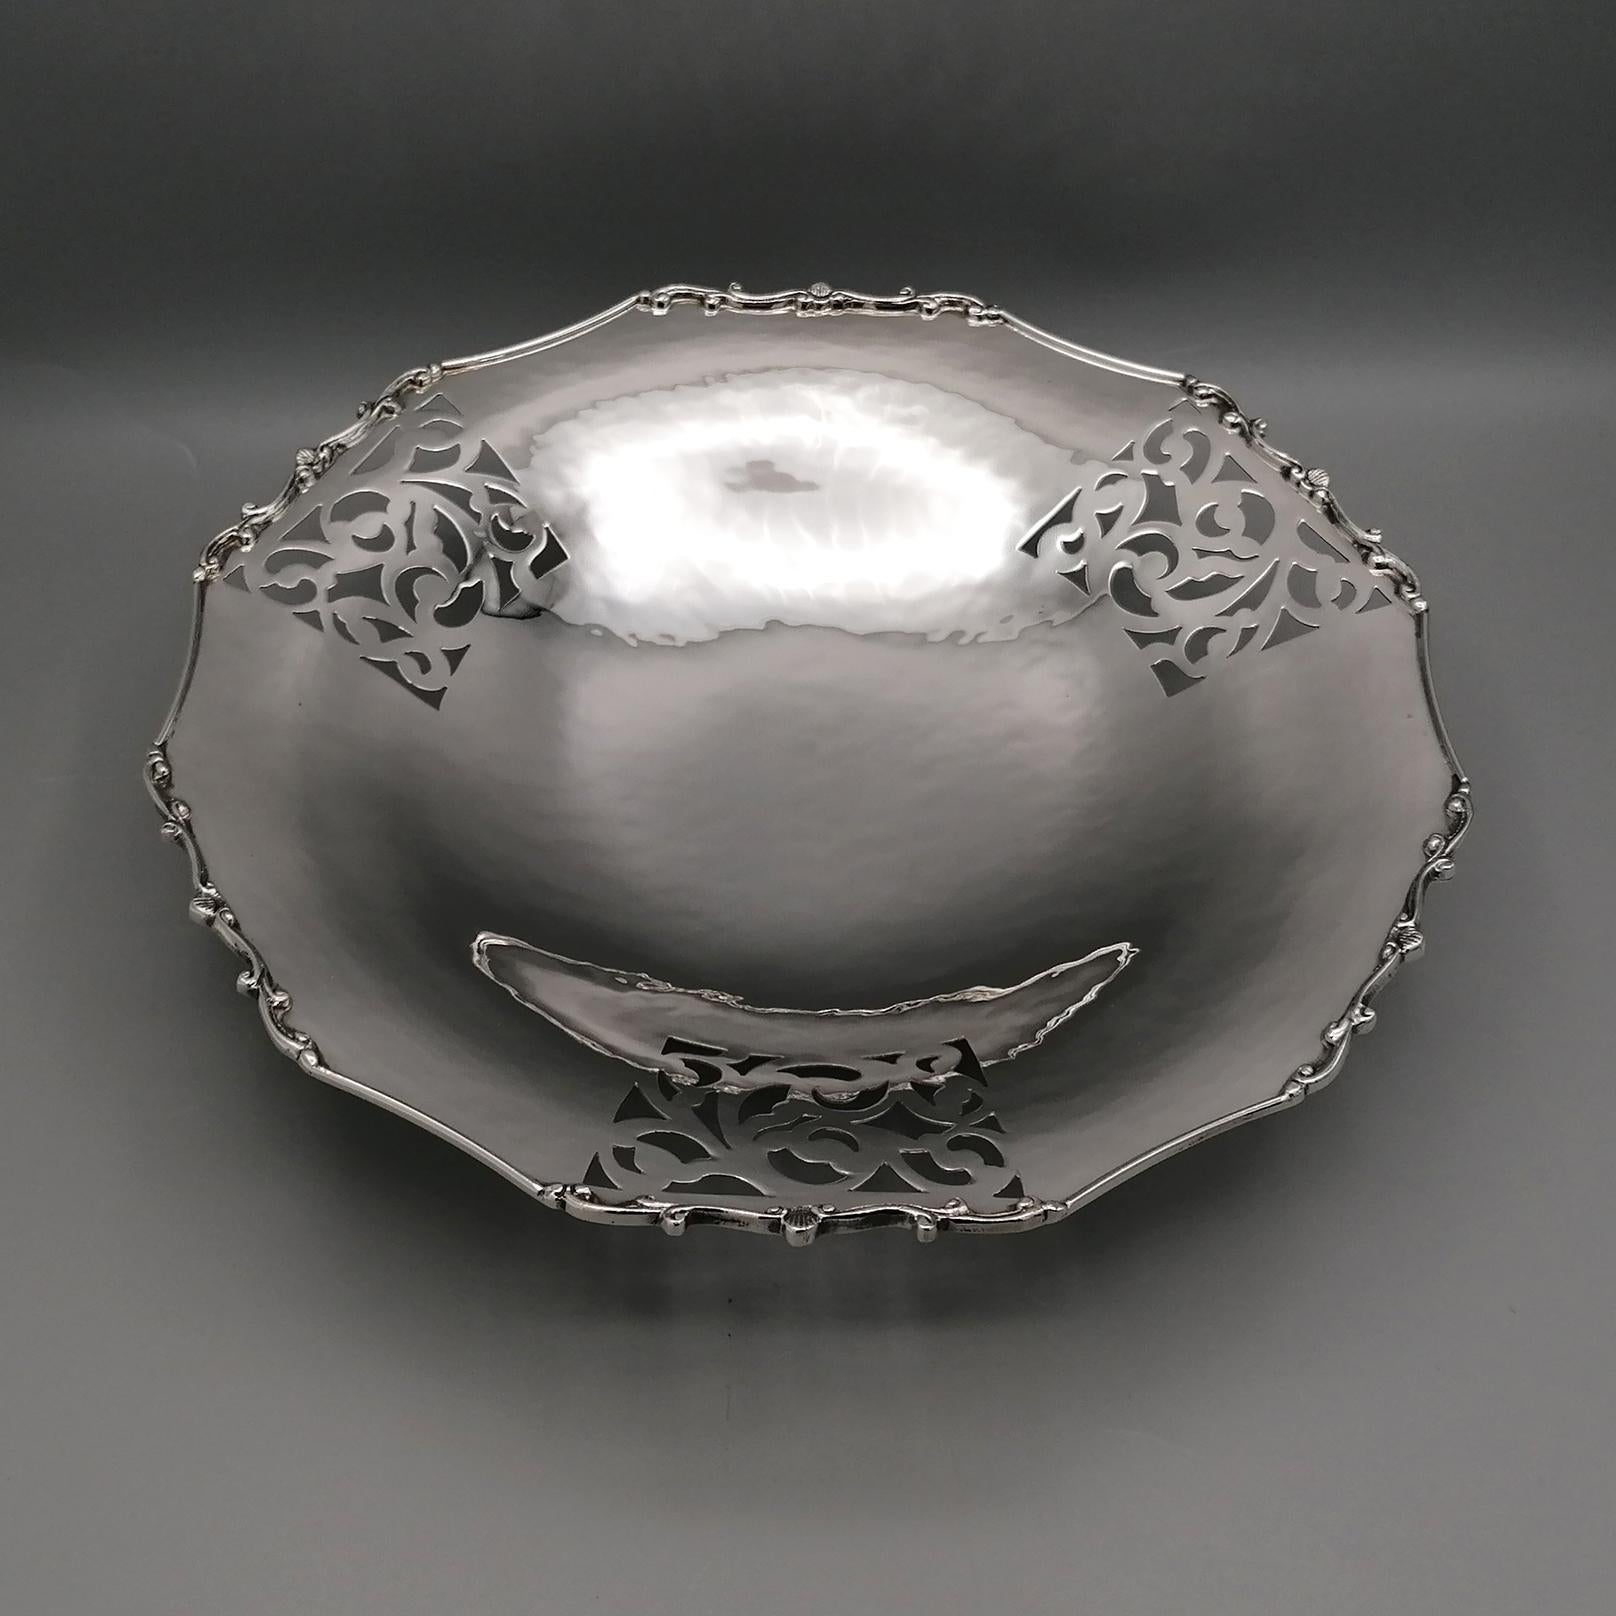 Forged Italian Solid Silver Centerpiece Baroque revival style on feet For Sale